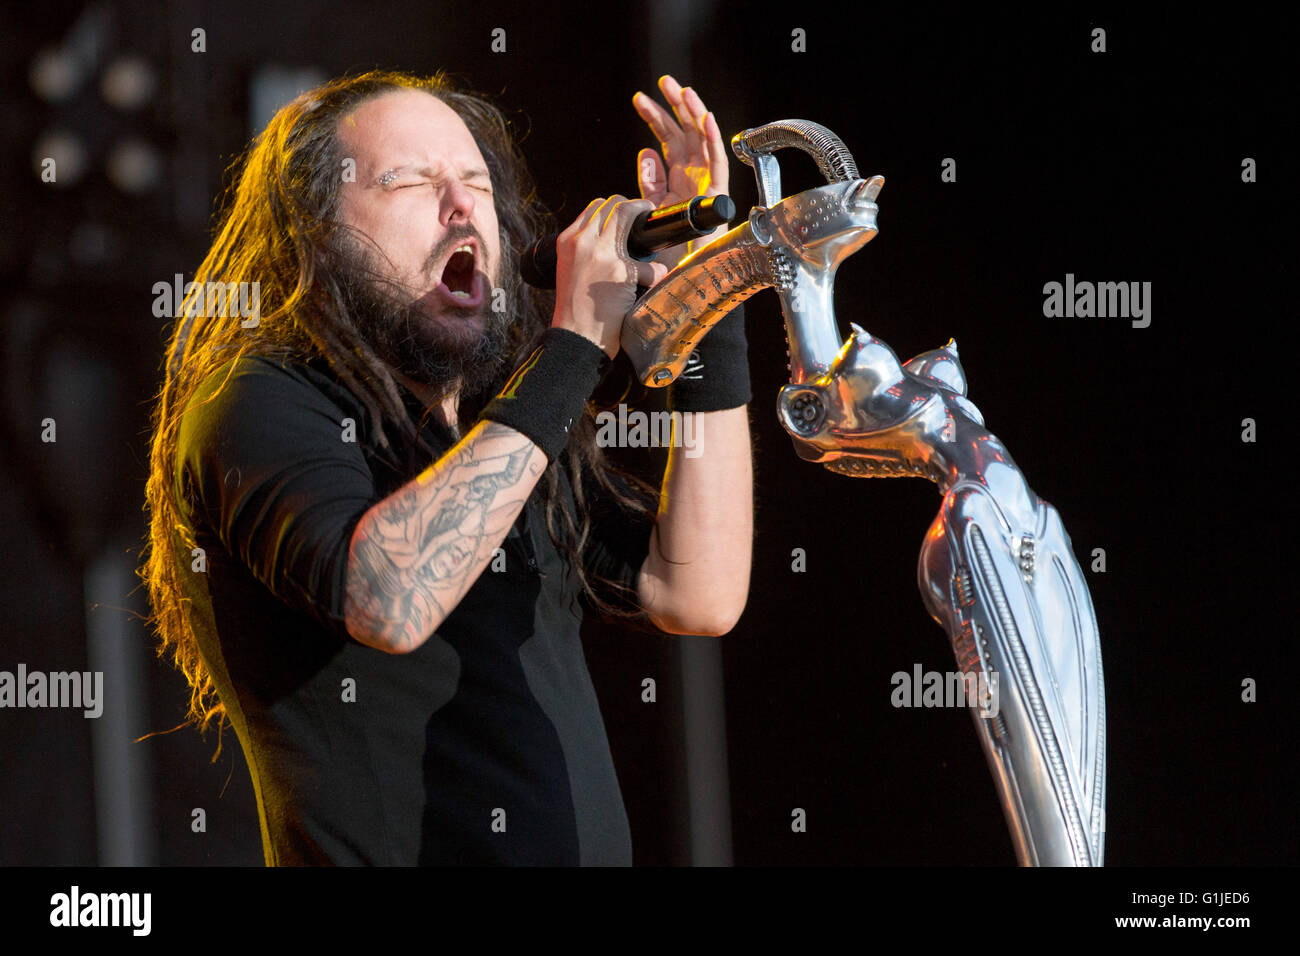 Somerset, Wisconsin, USA. 15th May, 2016. Singer JONATHAN DAVIS of Korn performs live at Somerset Amphitheater during the Northern Invasion Music Festival in Somerset, Wisconsin © Daniel DeSlover/ZUMA Wire/Alamy Live News Stock Photo